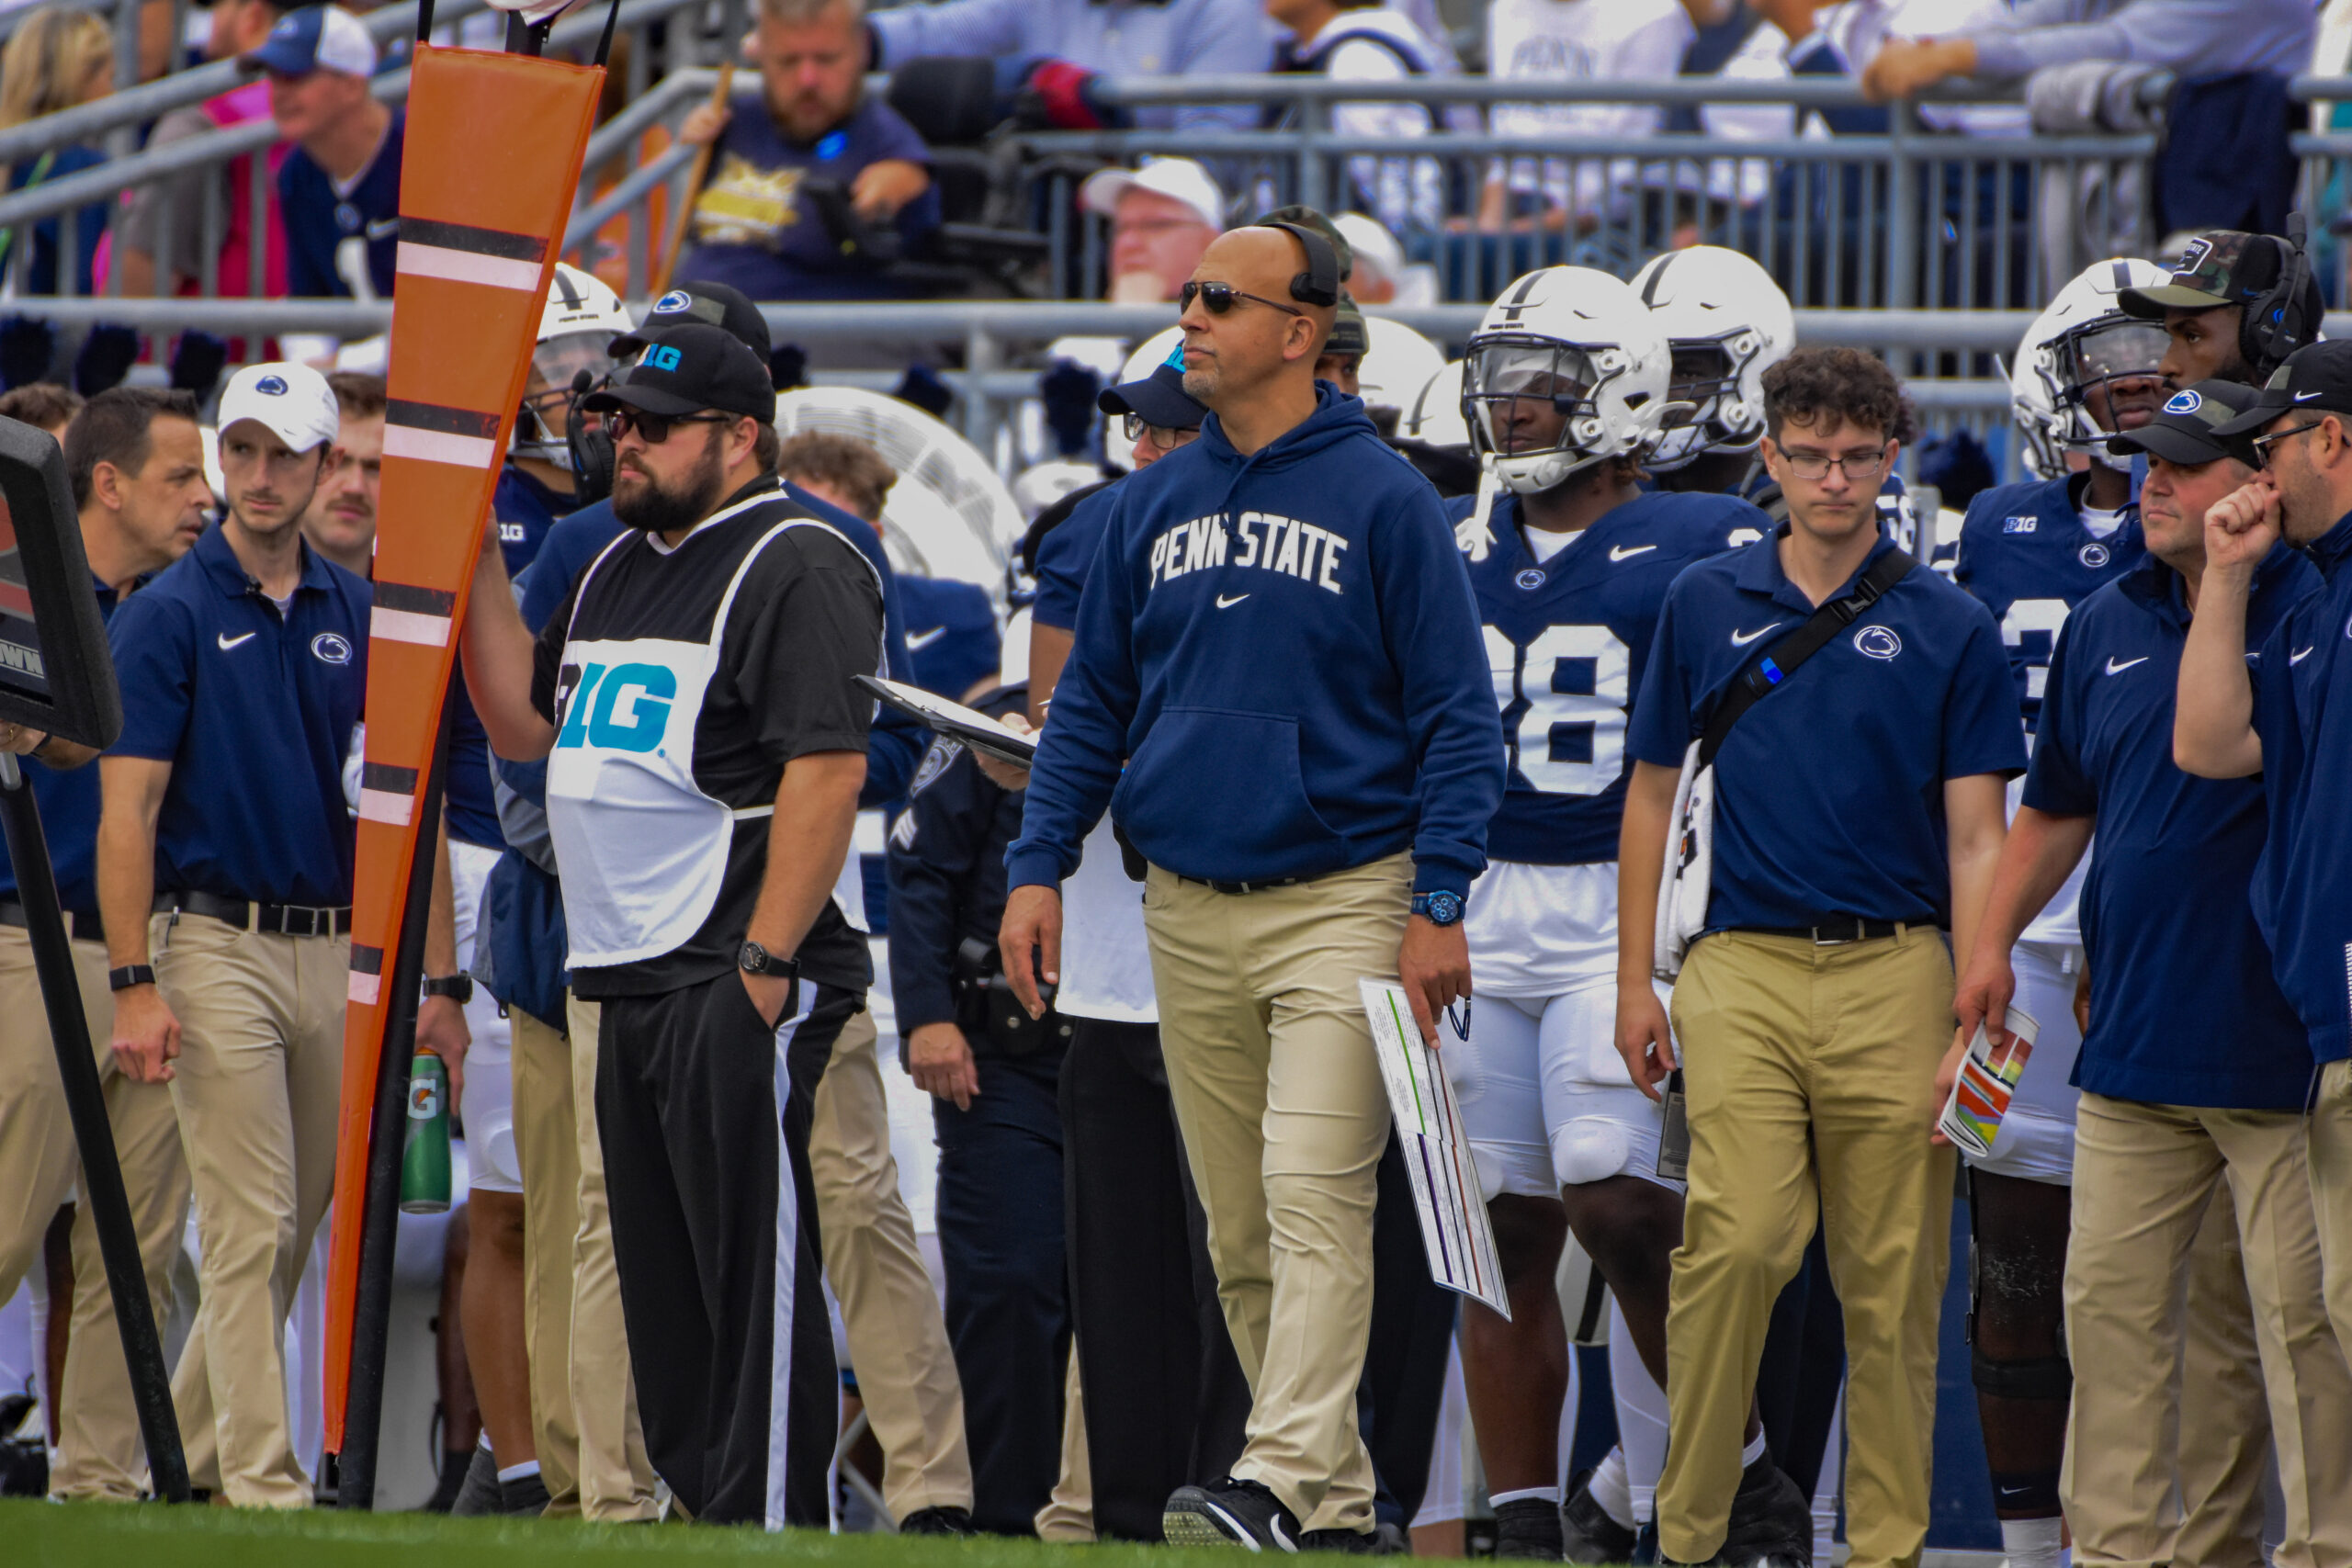 Penn State Football, James Franklin, Mad Dog Russo, Ohio State